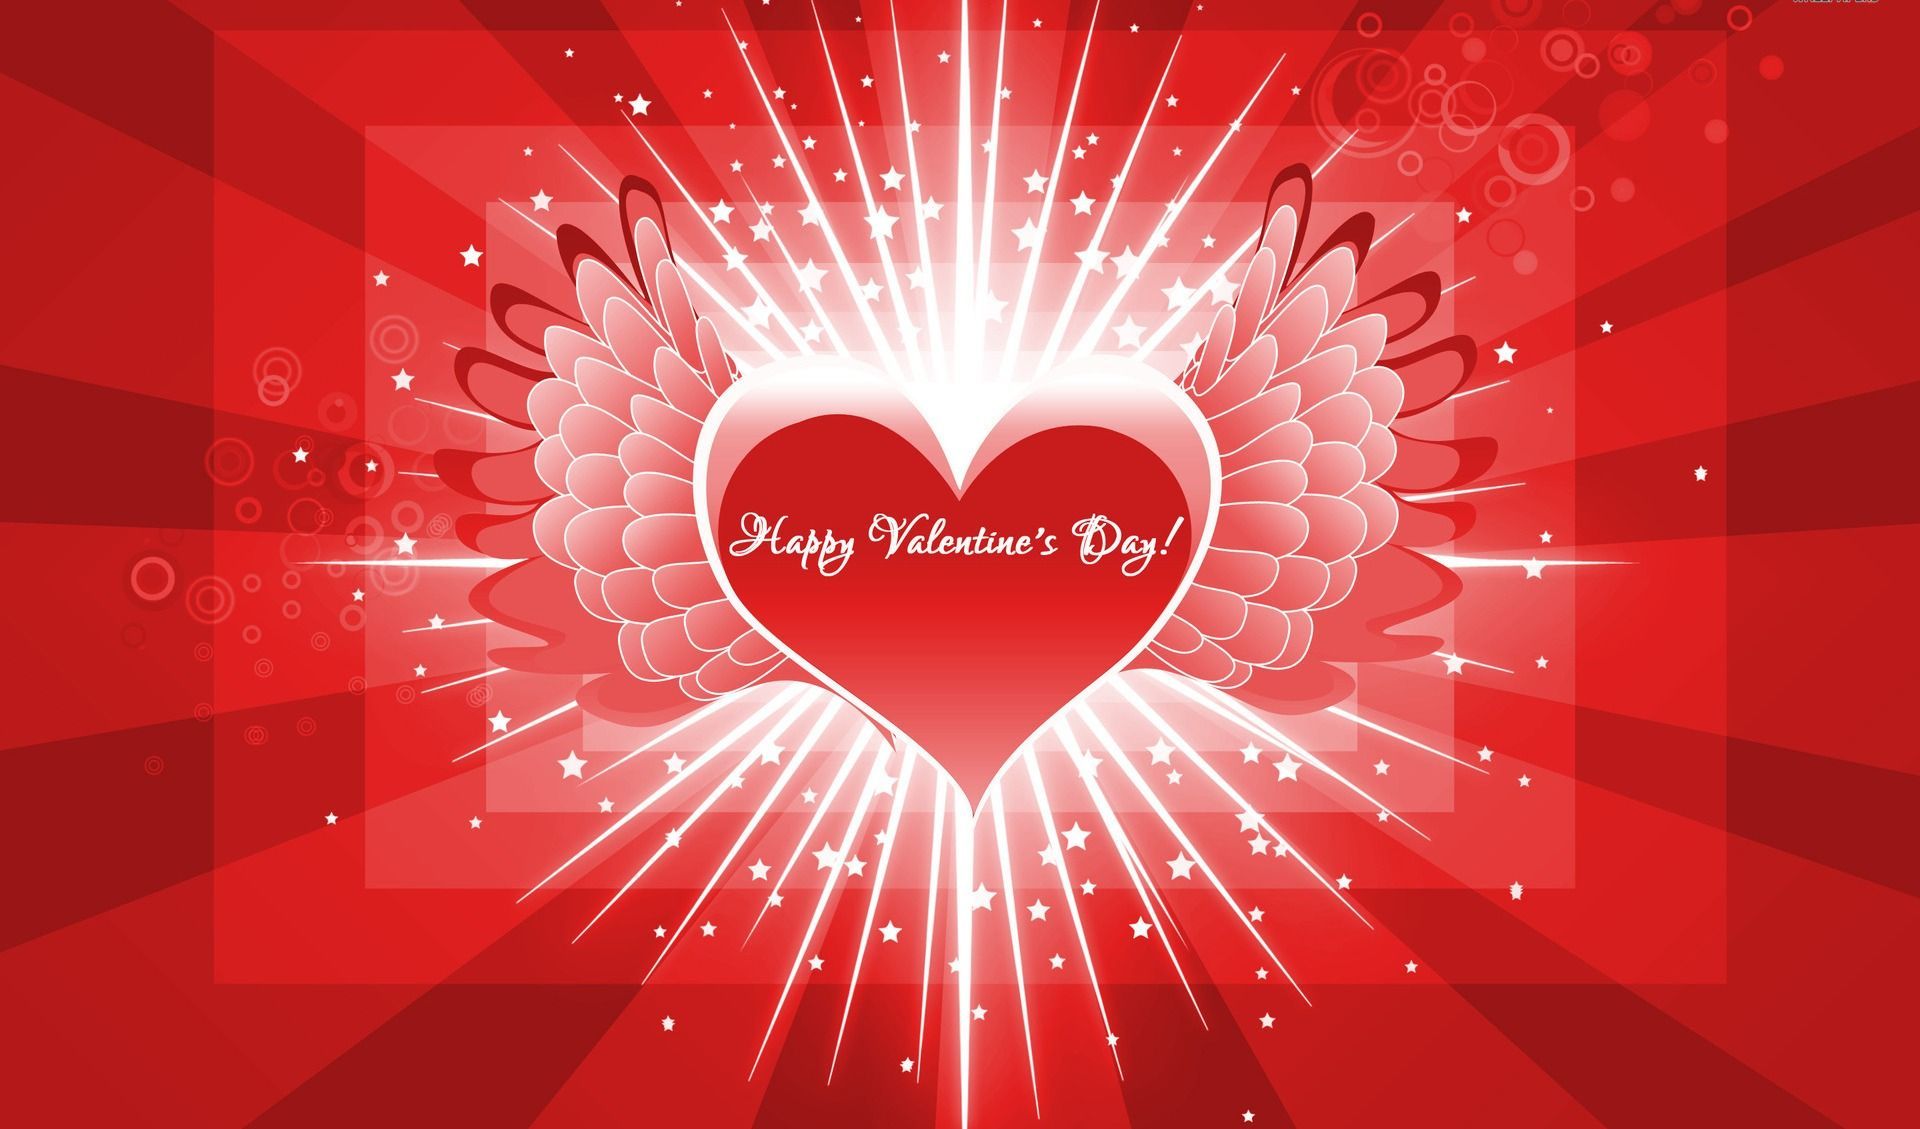 HD Valentine Day Wallpaper For Your GF BF. Happy Valentines Day Card, Happy Valentines Day Image, Valentines Day Holiday